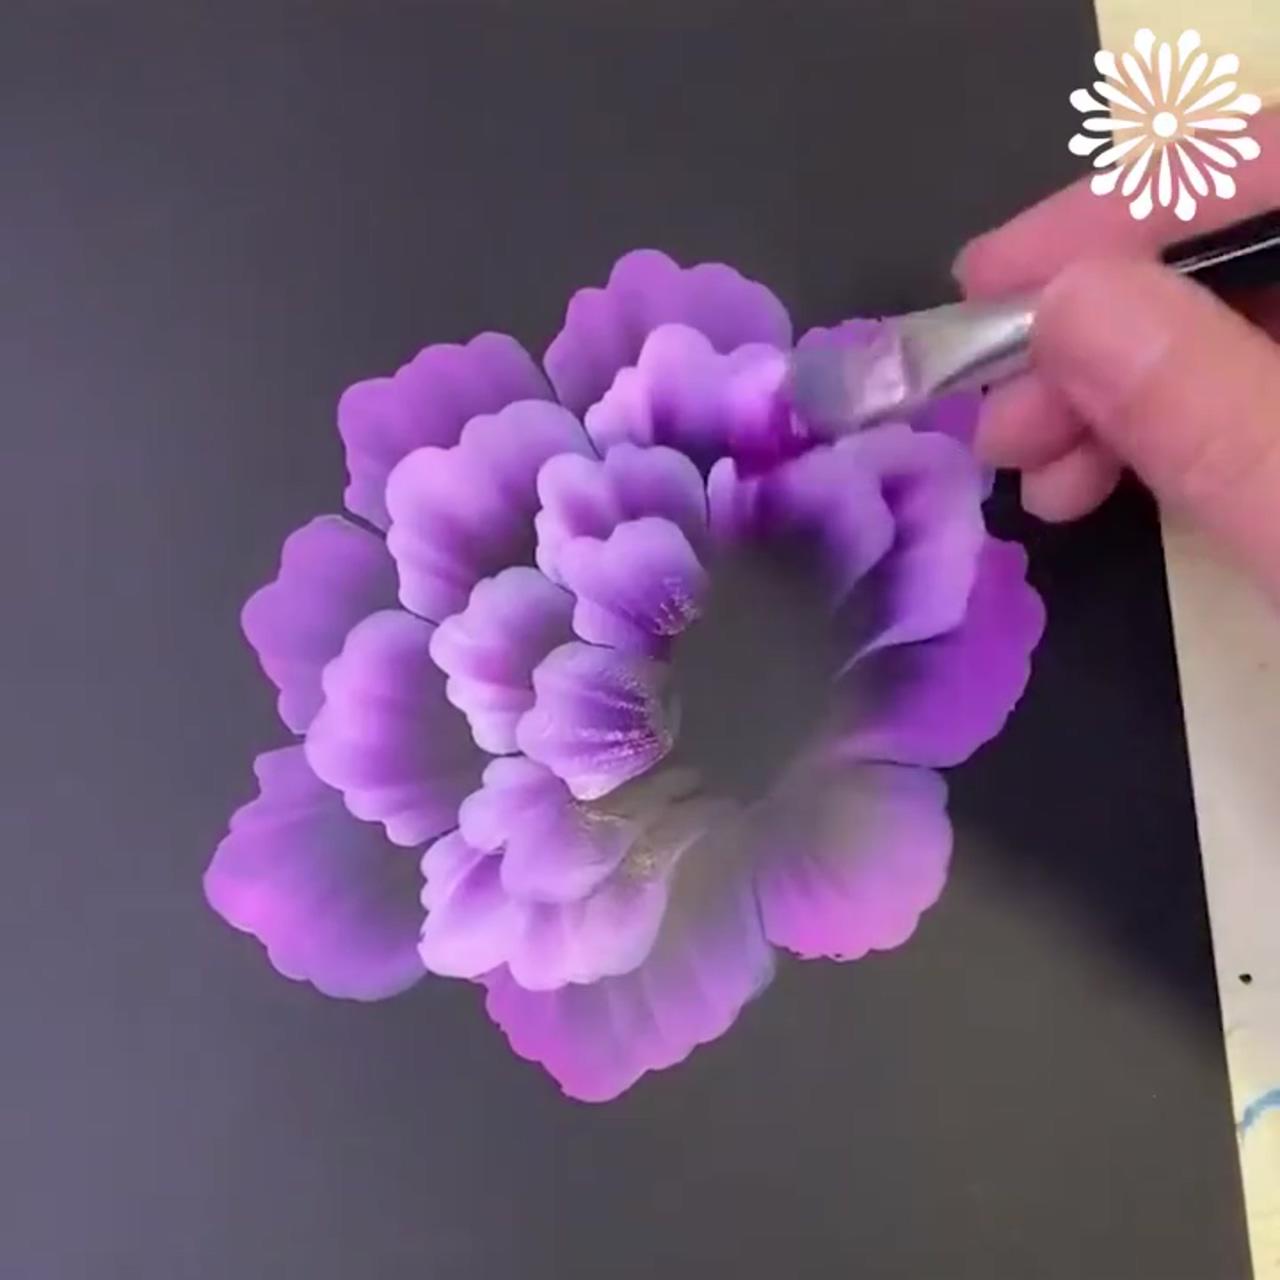 You can be as creative as you want with these drawing ideas; flower painting videos